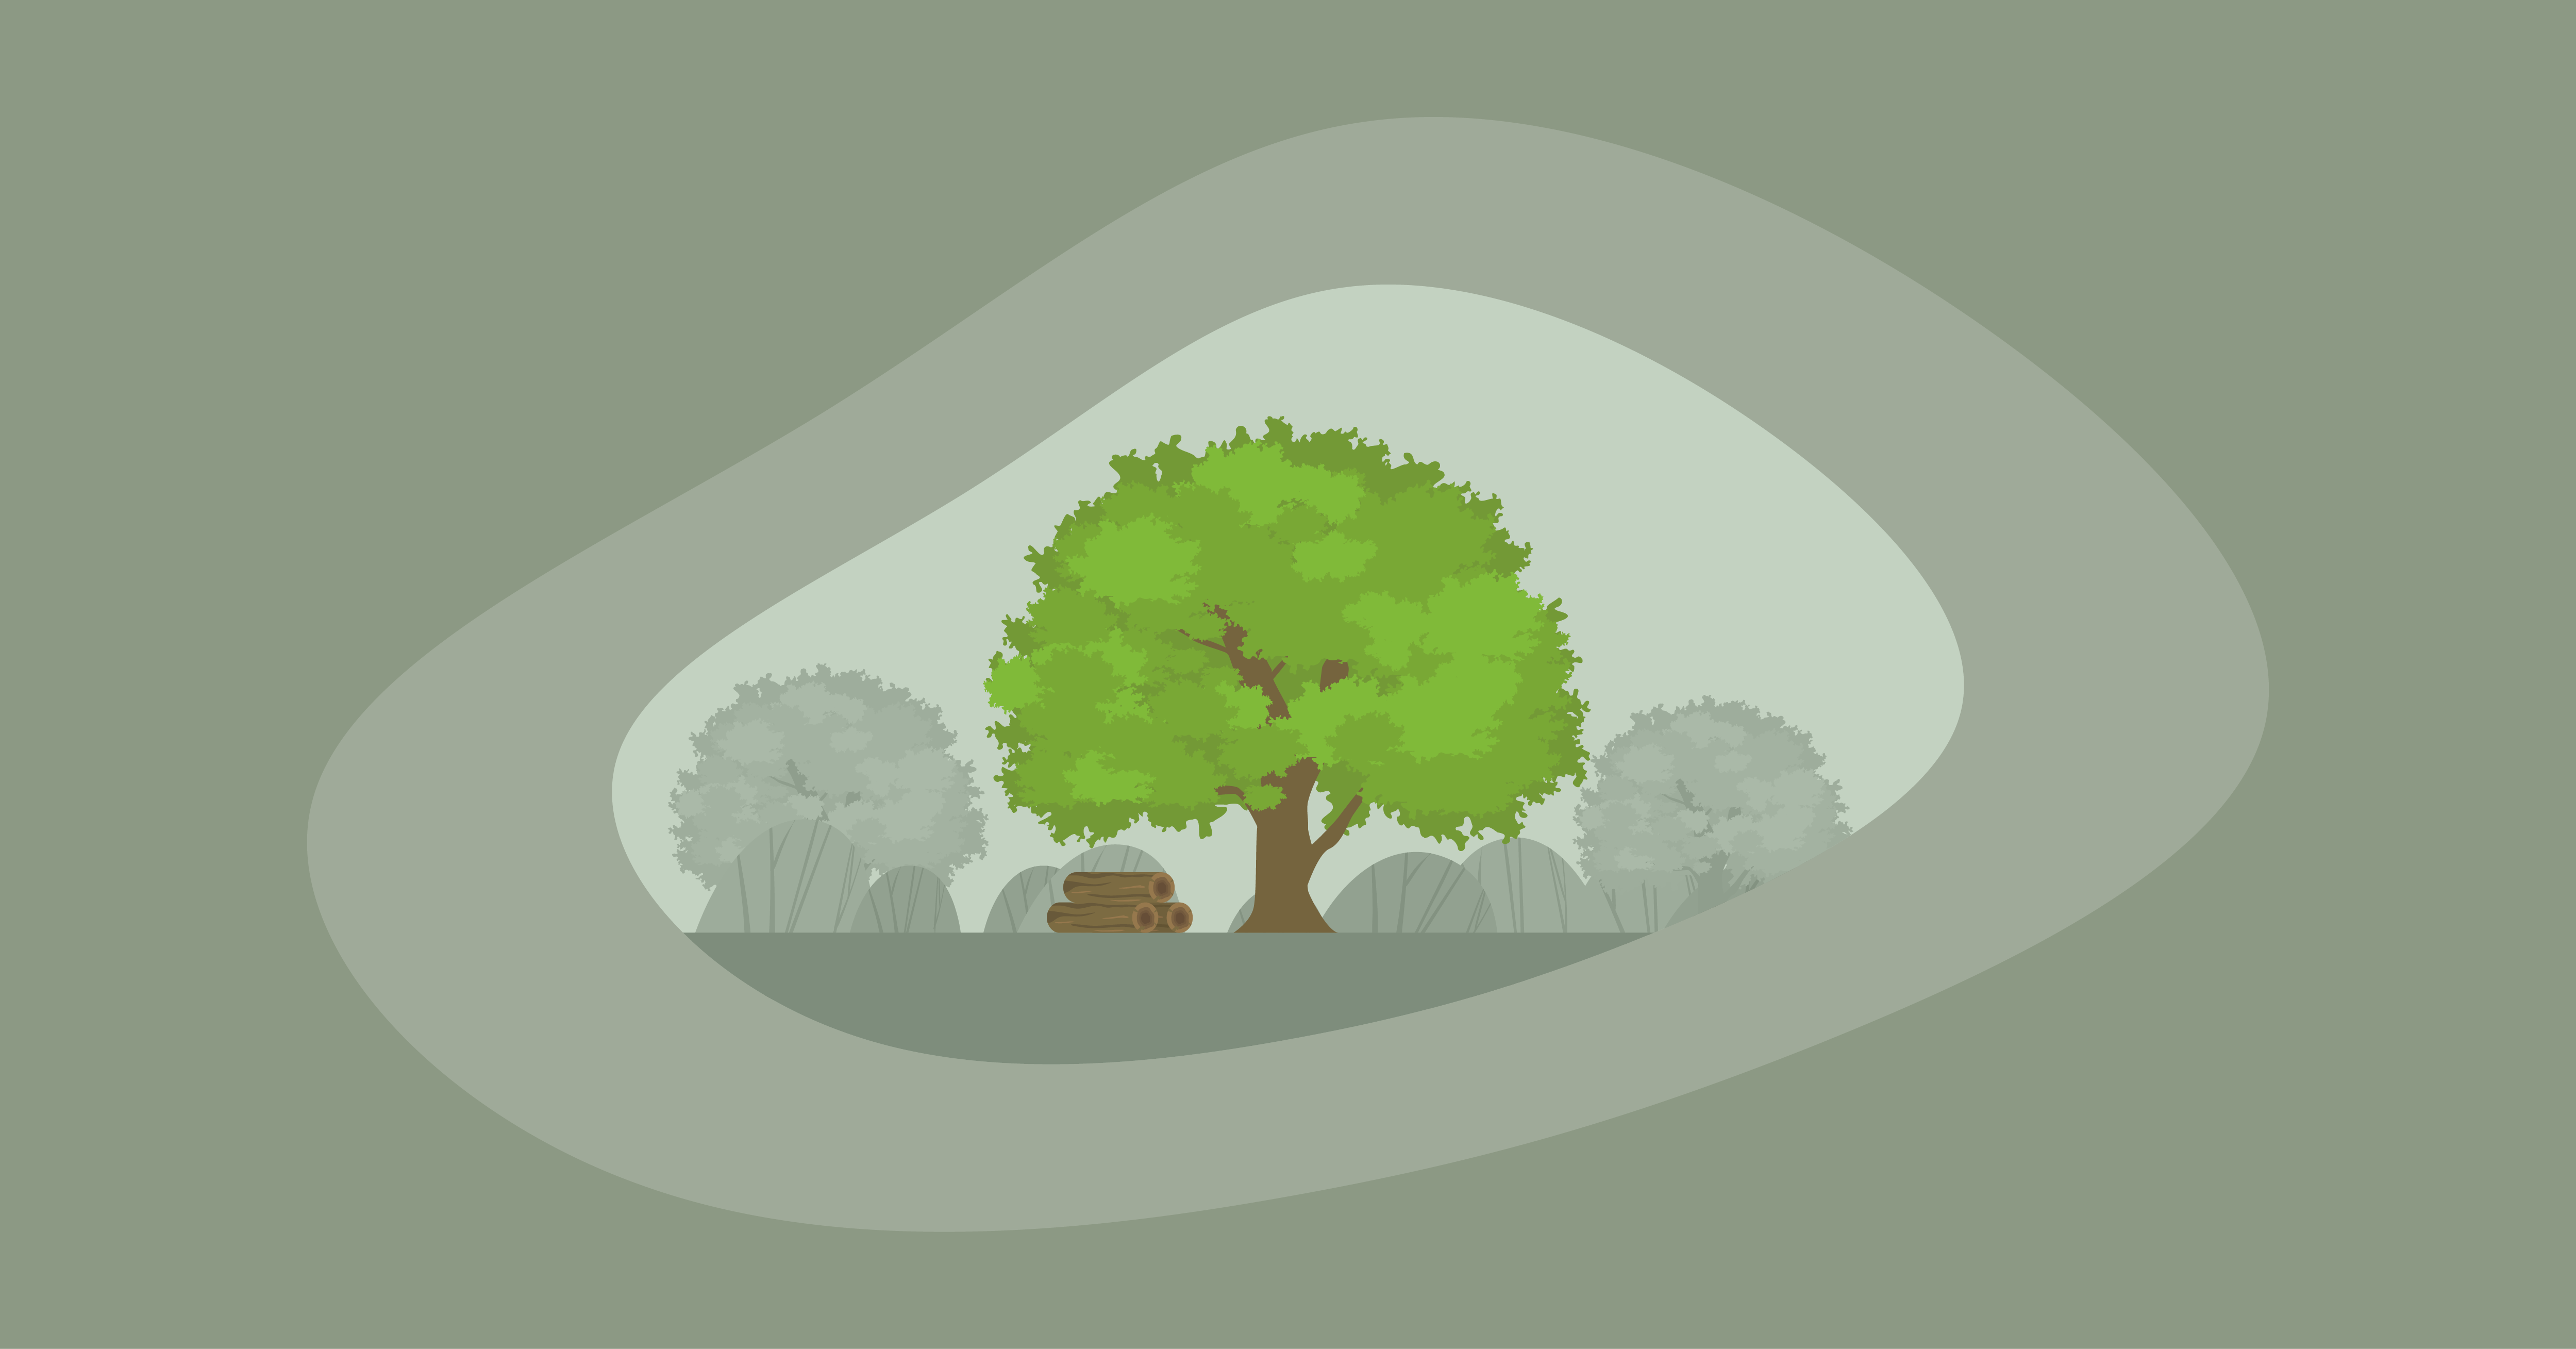 Illustration of an elm tree and wood